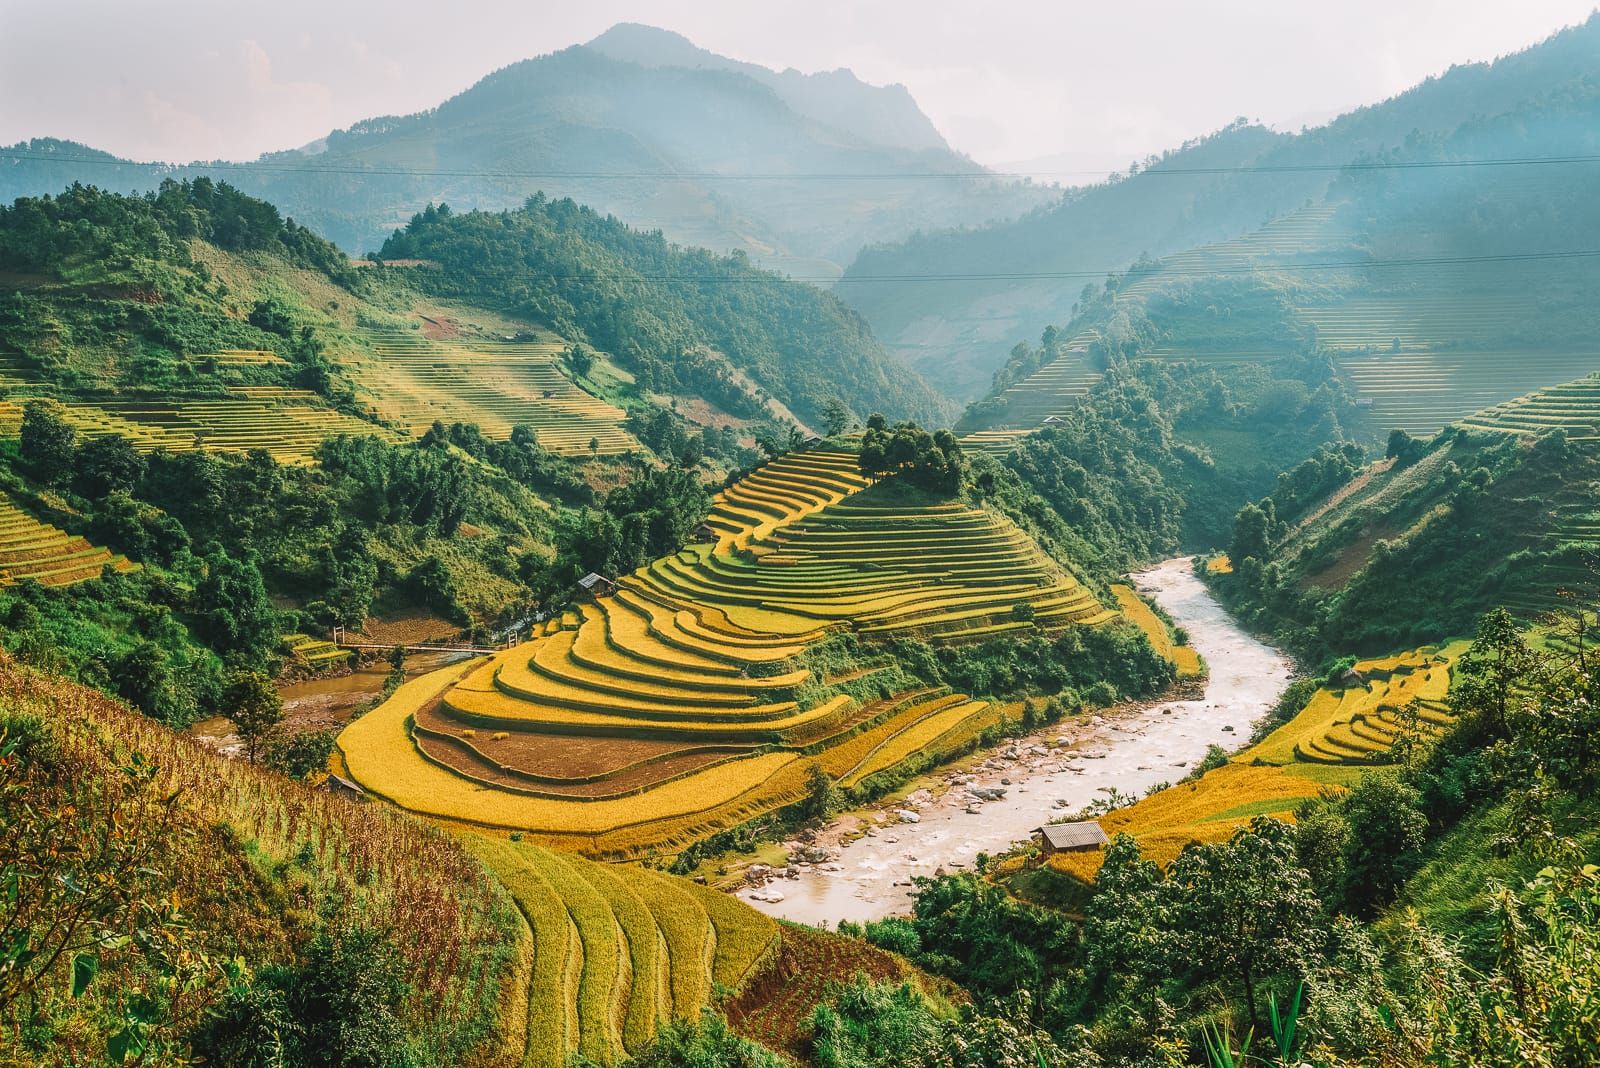 The terraced rice fields are dotted with green plants and trees - Sapa, Vietnam